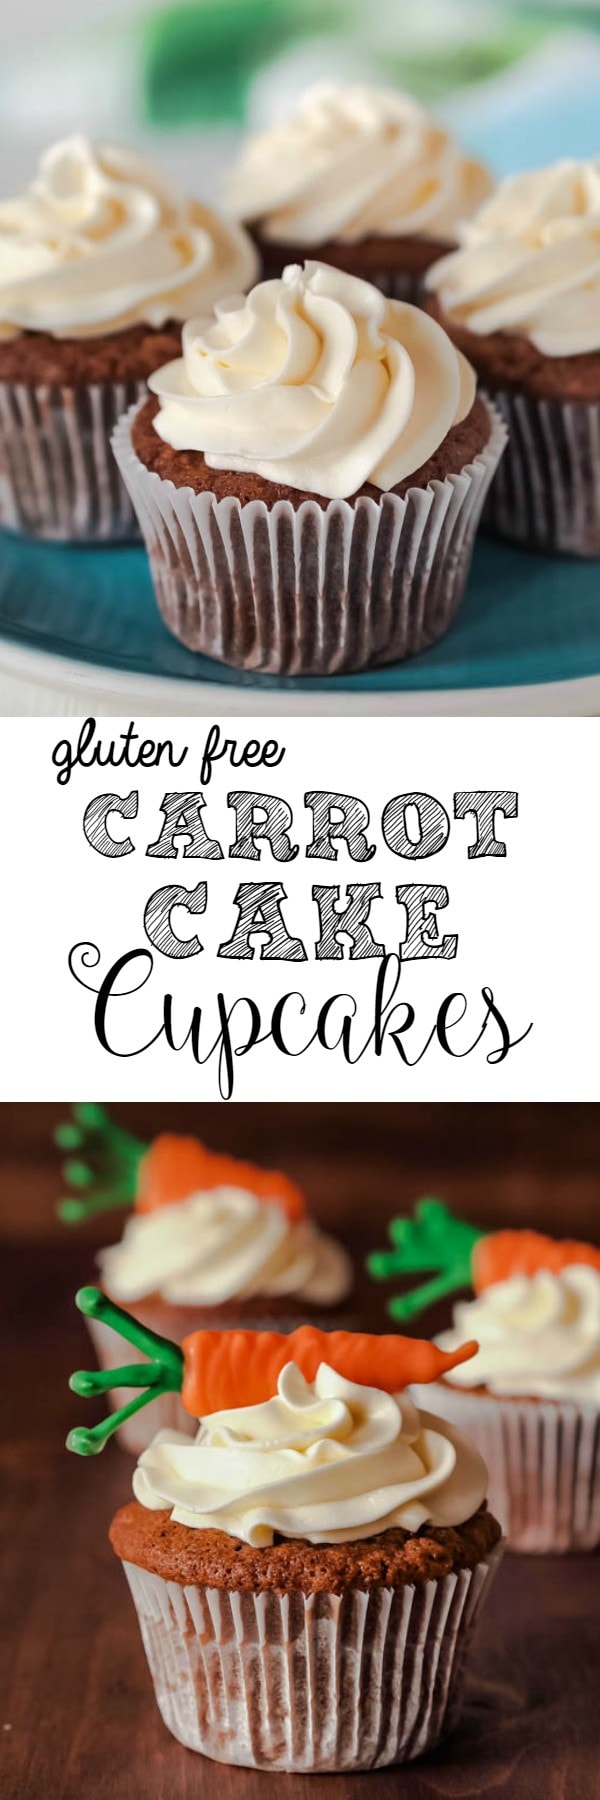 These Gluten Free Carrot Cake Cupcakes are loaded with shredded carrots and warming cinnamon. Topped with the lightest cream cheese frosting, you are going to love them!